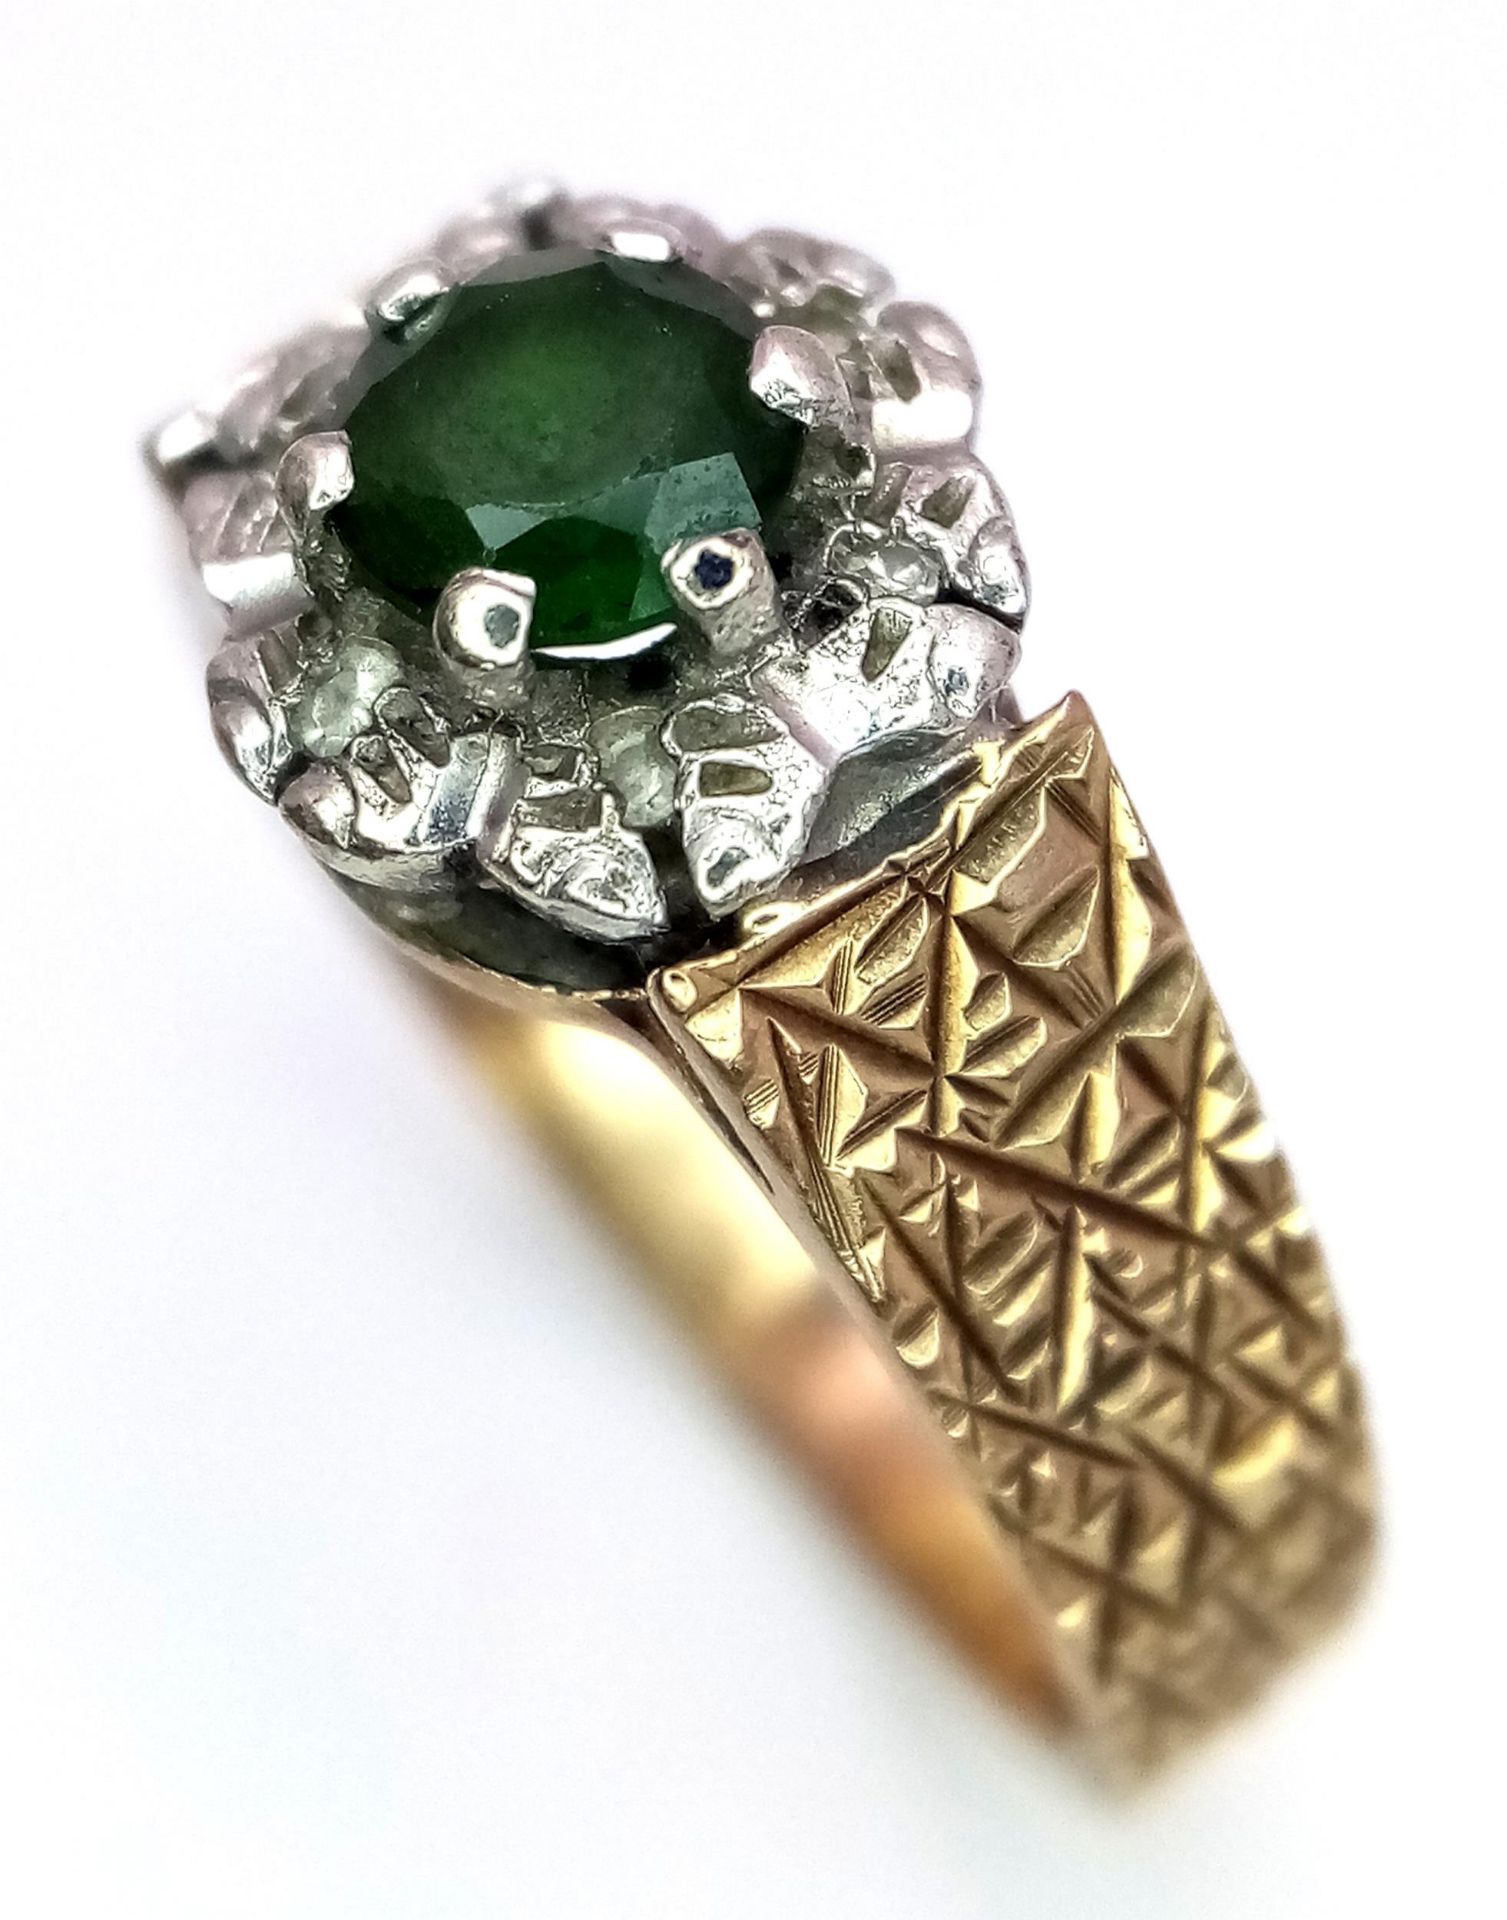 A Vintage 9K Peridot and Diamond Ring. Central round cut peridot with a diamond halo. Size L. 3.4g - Image 3 of 6